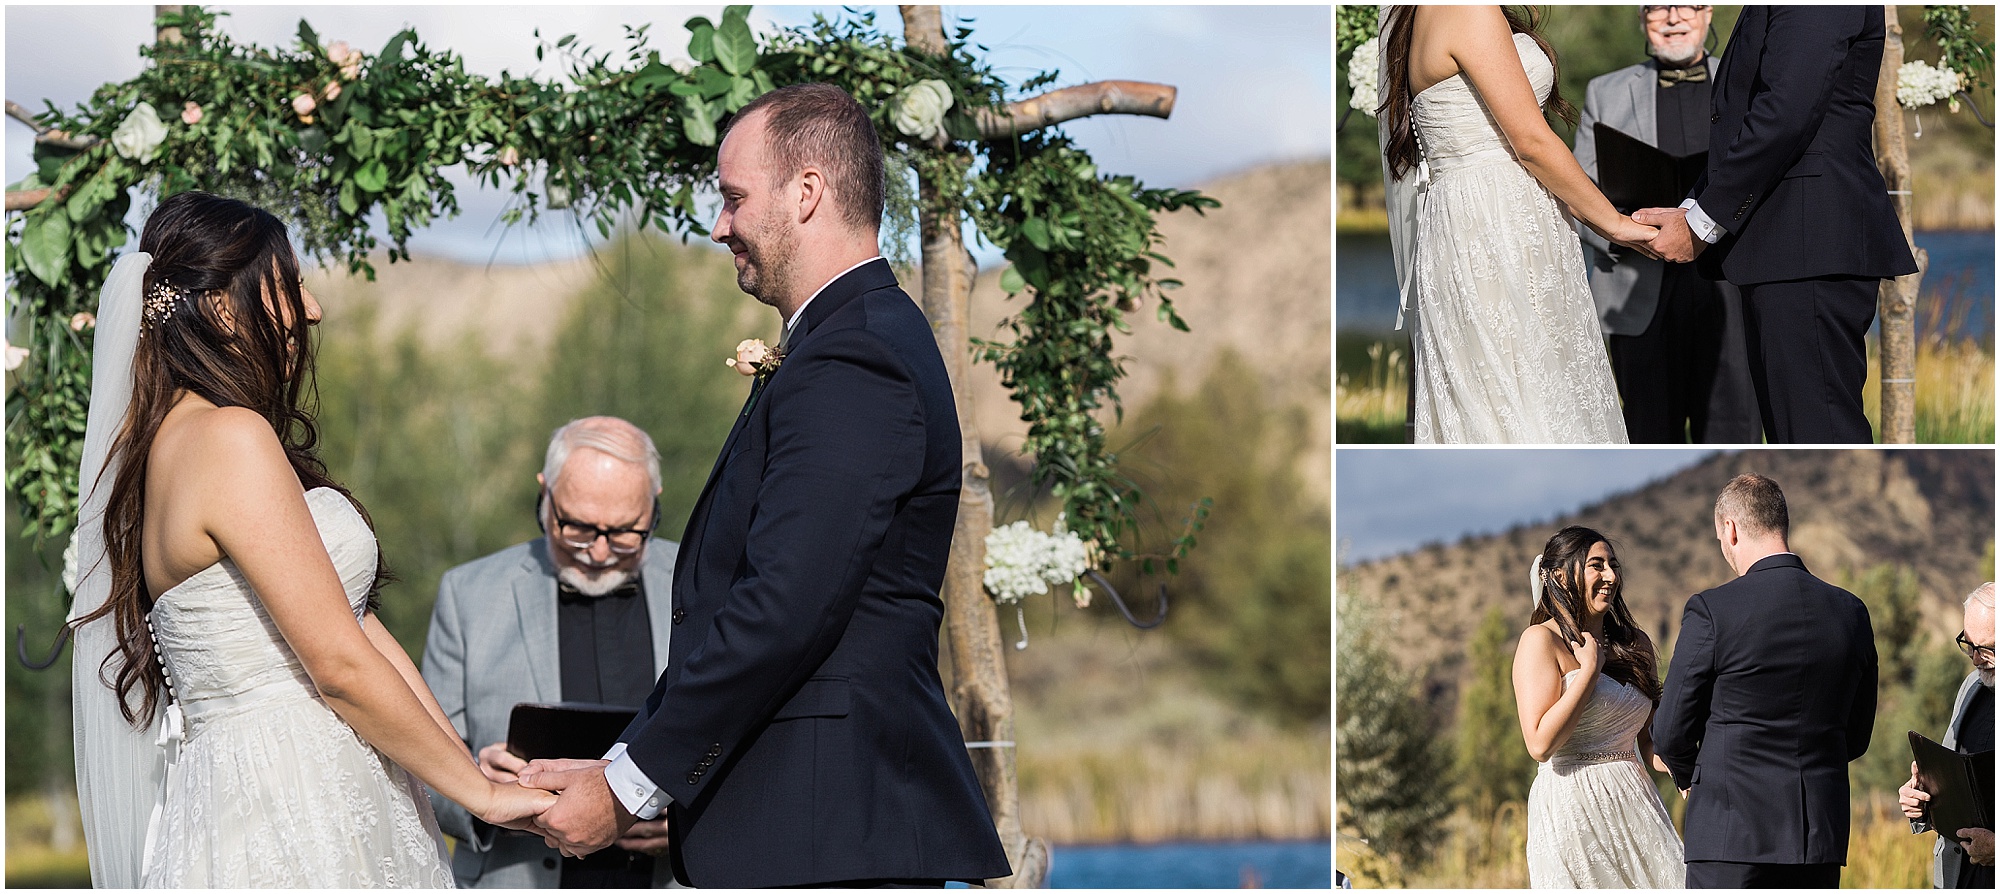 A heartfelt wedding ceremony full of tears at this Ranch at the Canyons falls wedding near Bend, OR. | Erica Swantek Photography